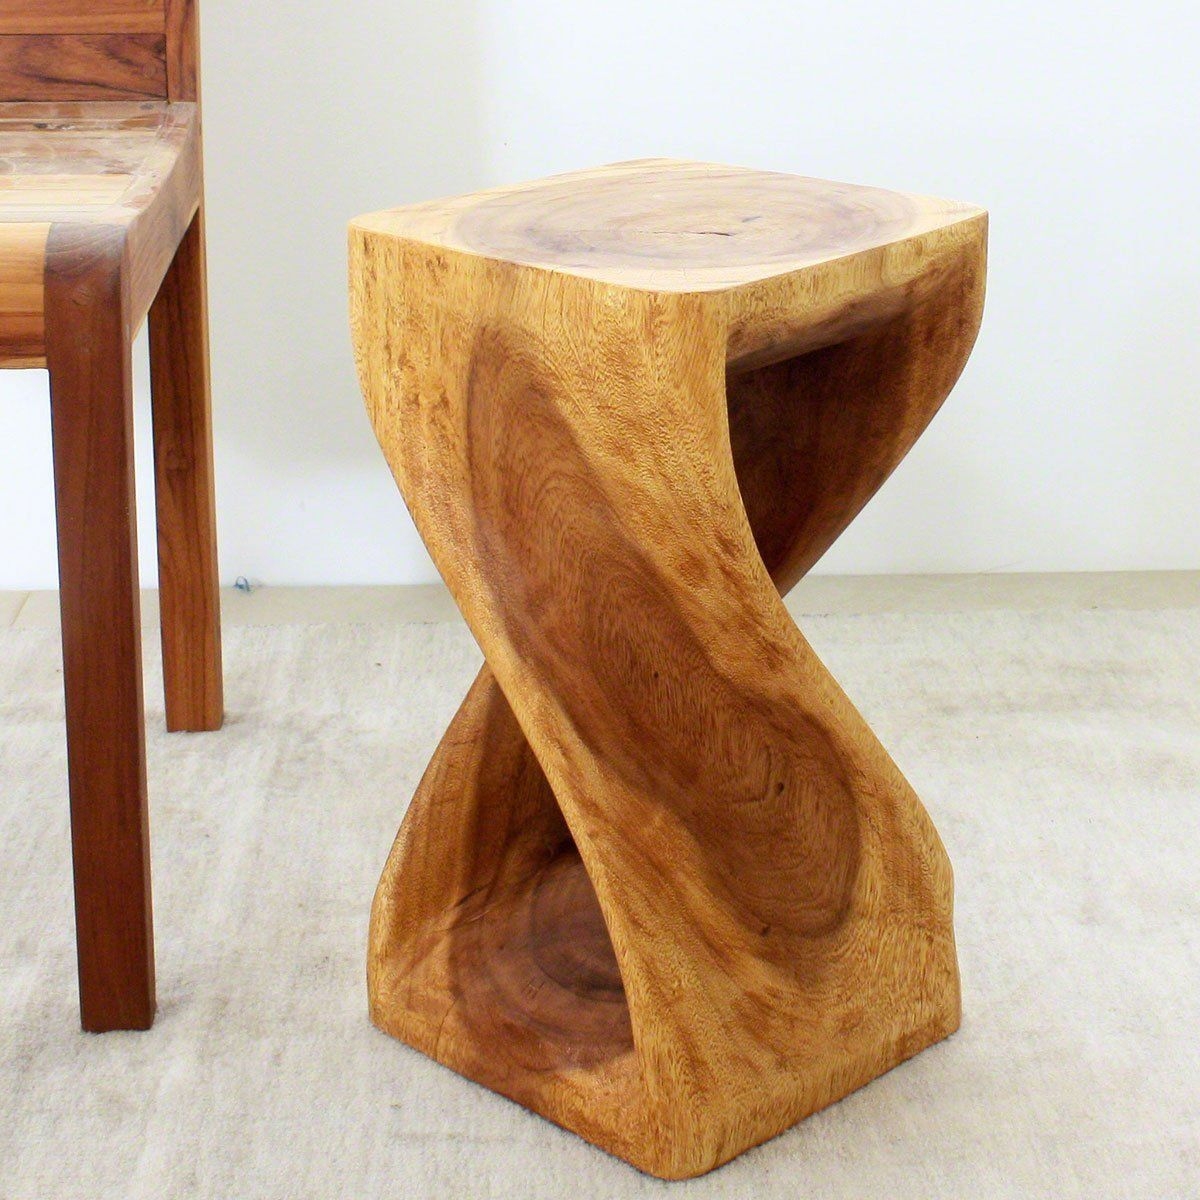 Twisted Oak Table Stool Thai Traditional or Contemporary Style